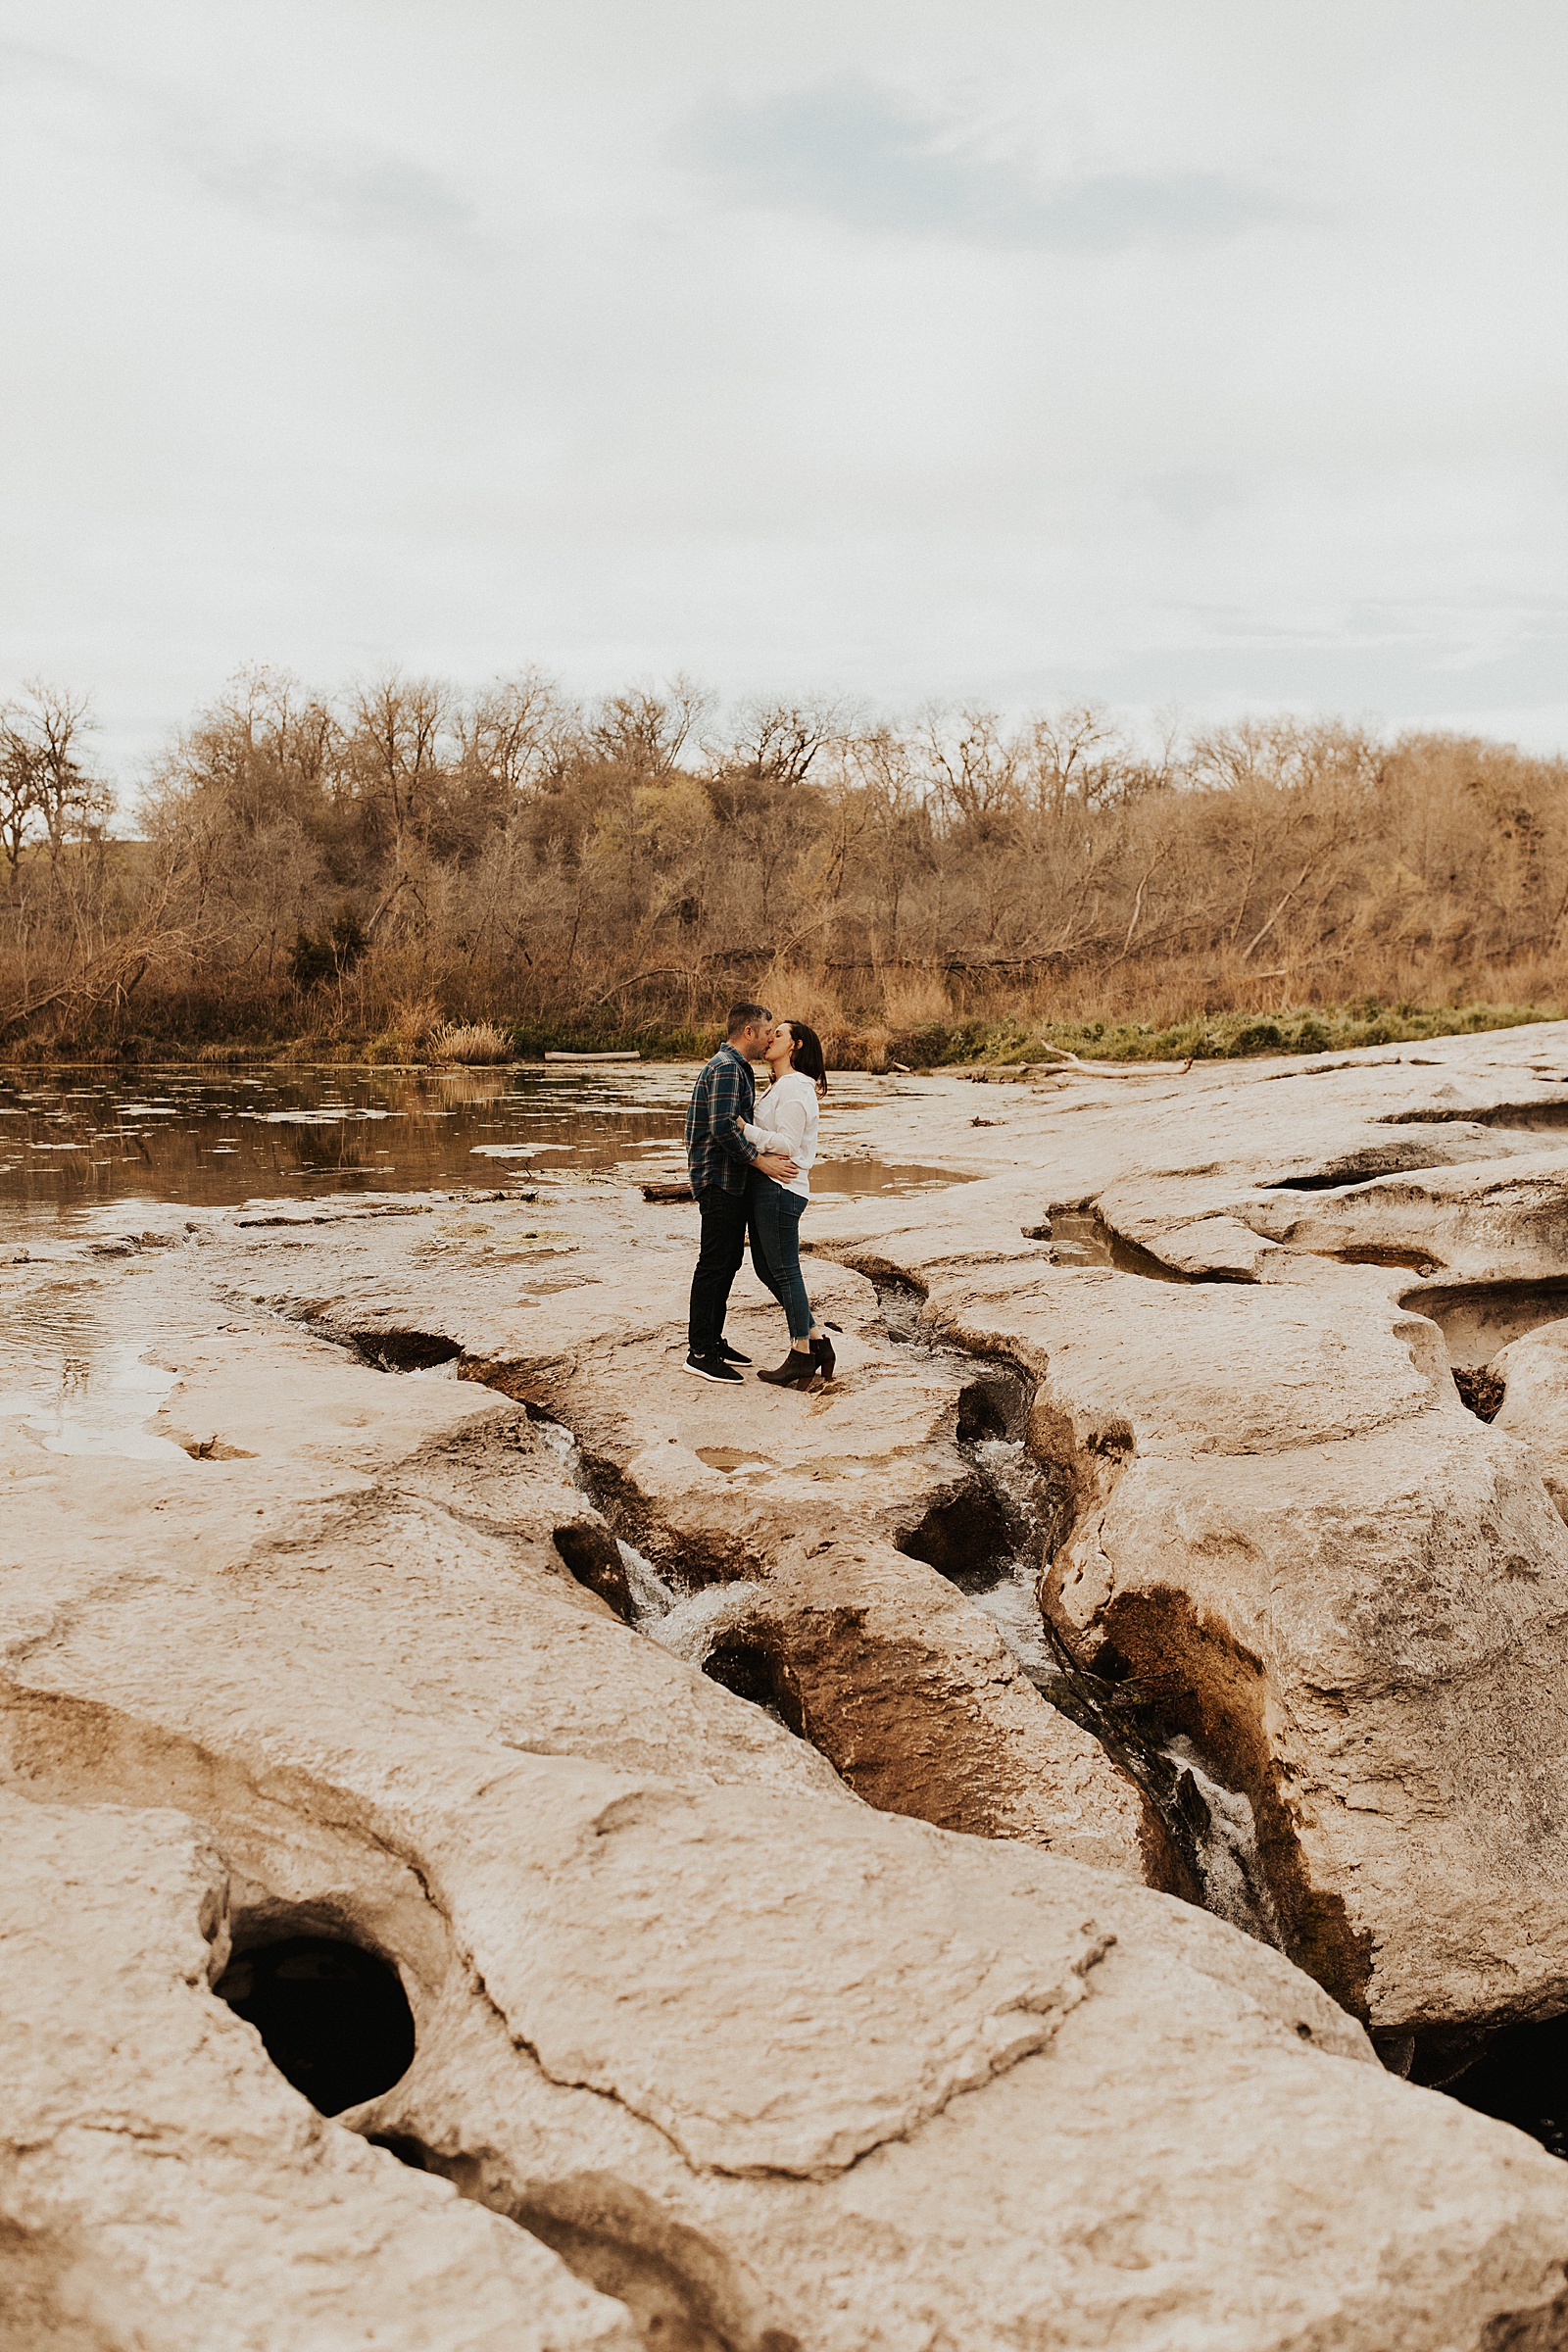 We ended their engagement session with some fun at McKinney Falls State Park in Austin, TX.